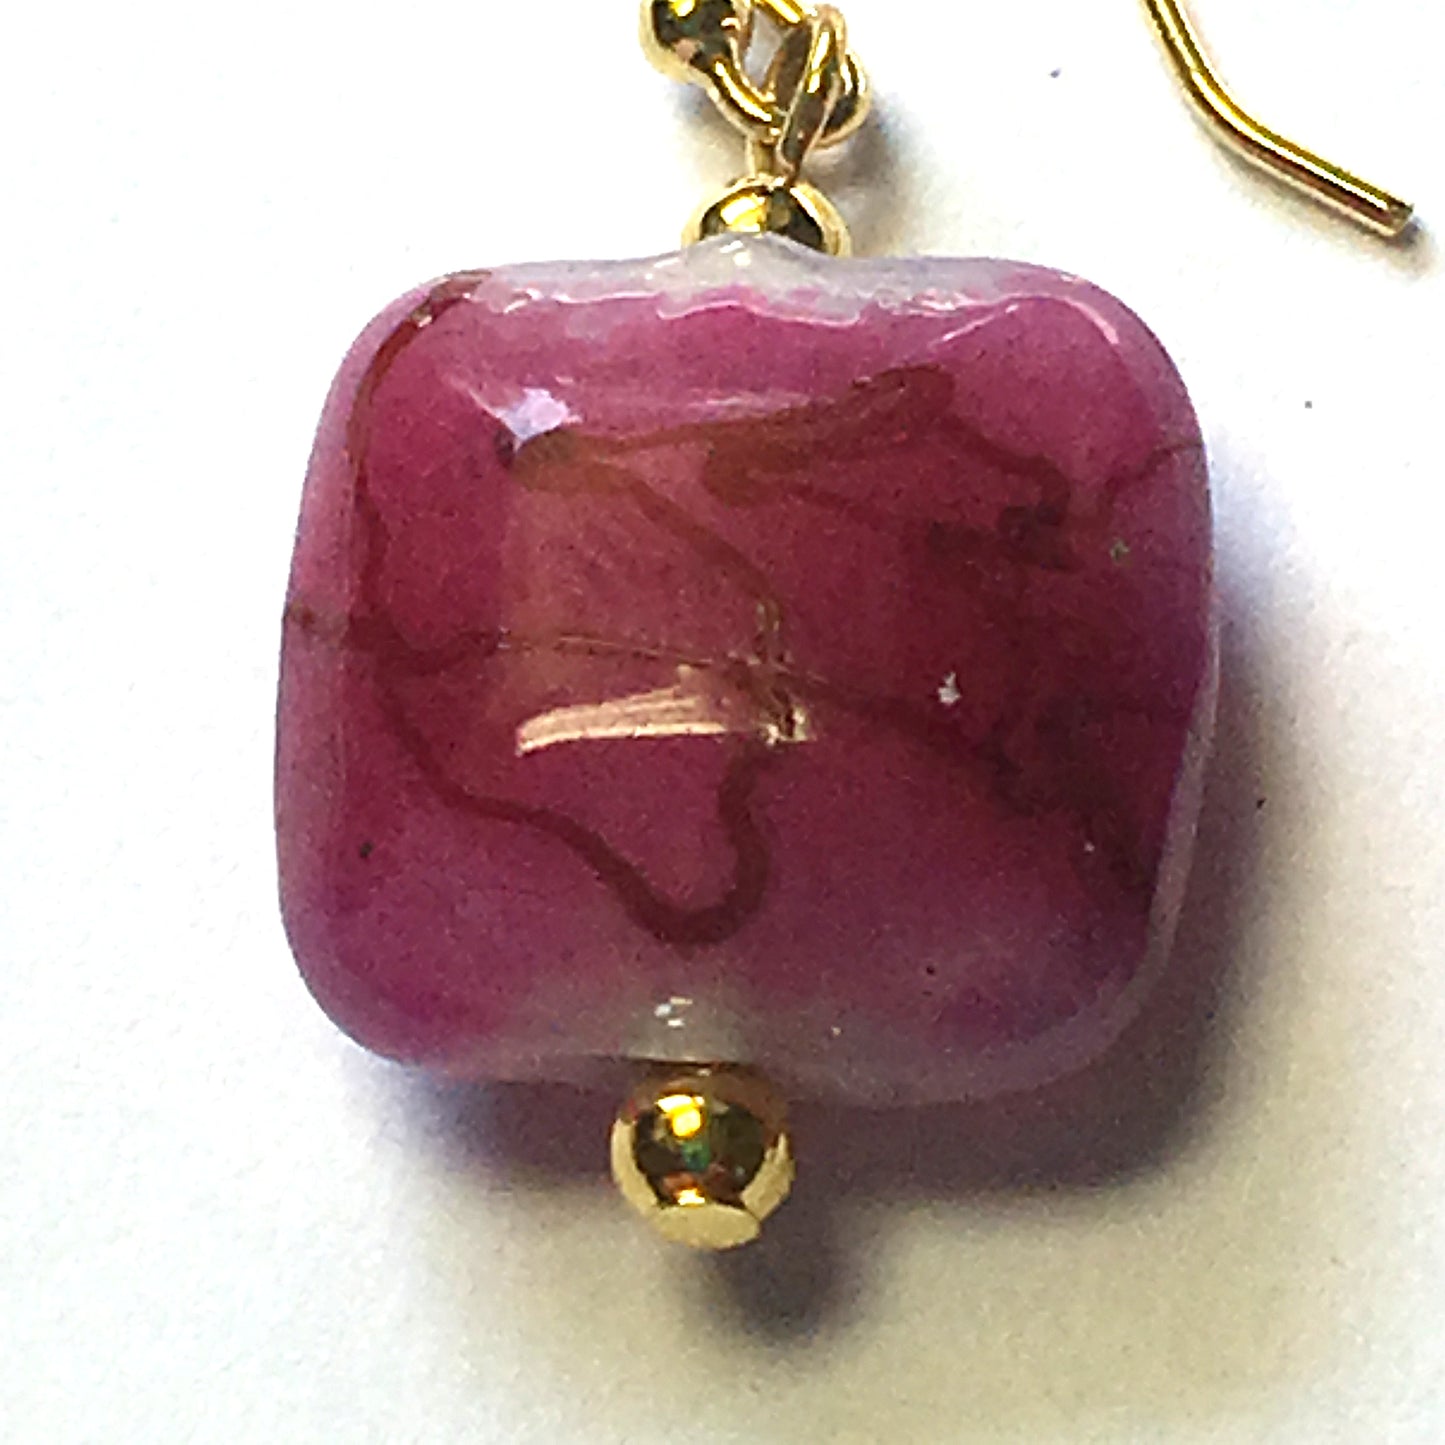 Neon Pink Drizzle Rounded Square Glass Bead Earrings With 14K Gold-Plated Beads and Ear Wires